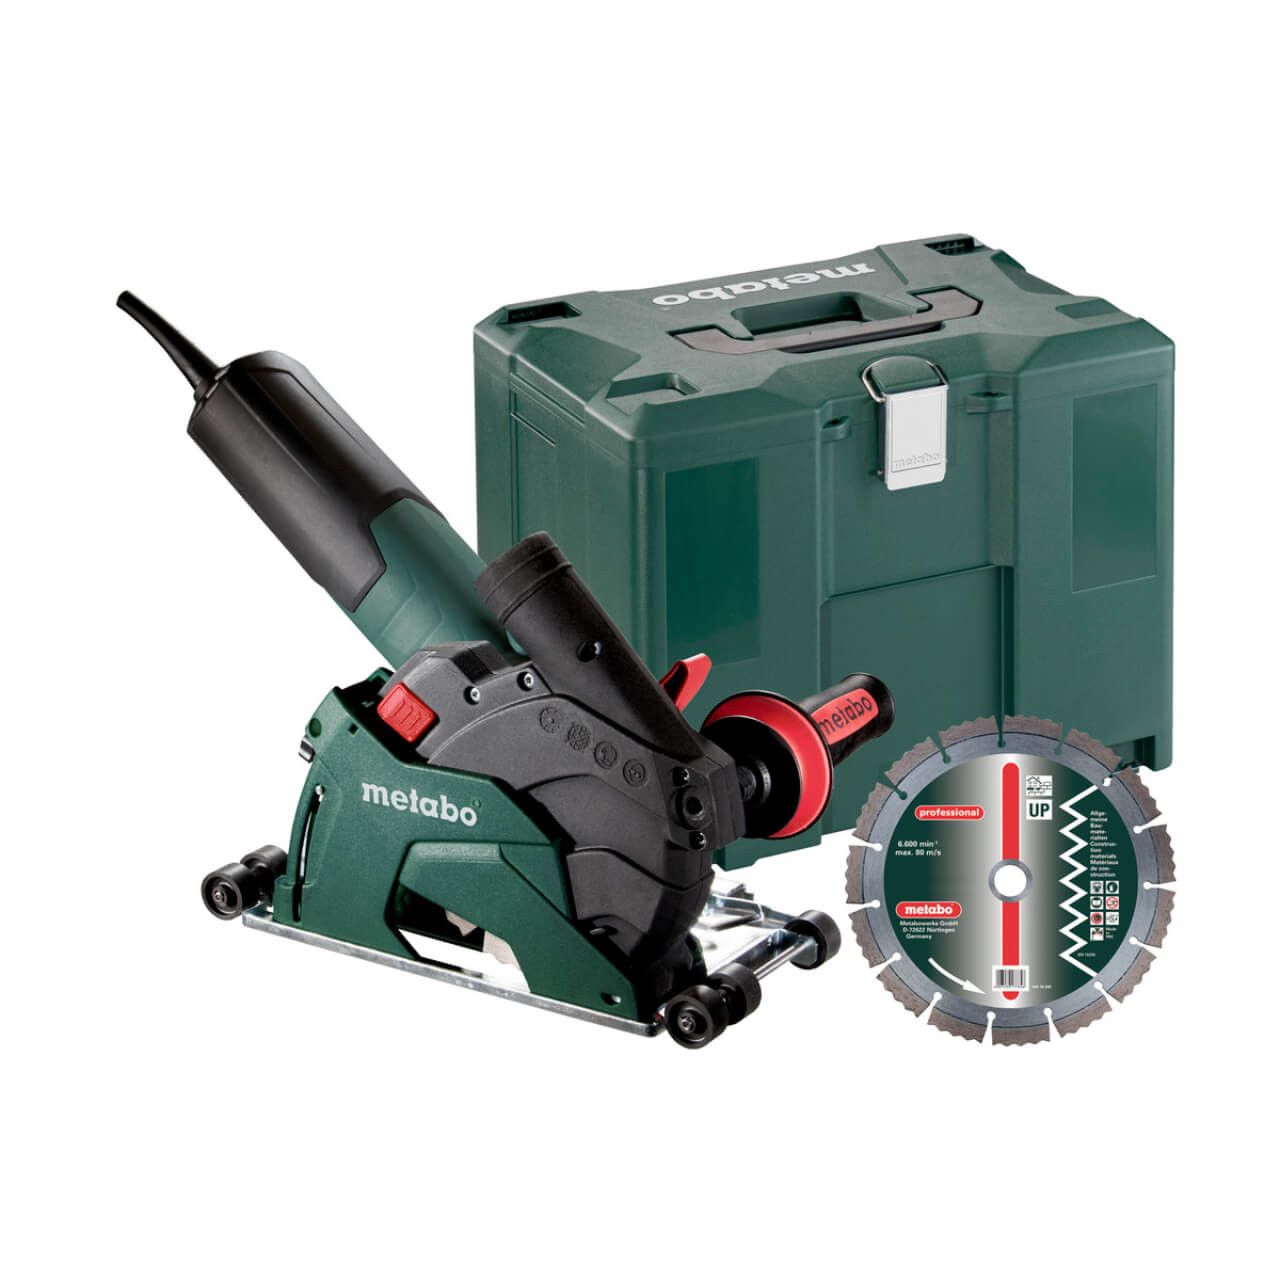 Metabo T 13-125 CED 1350W 125mm Diamond Cutting System with Dust Extraction